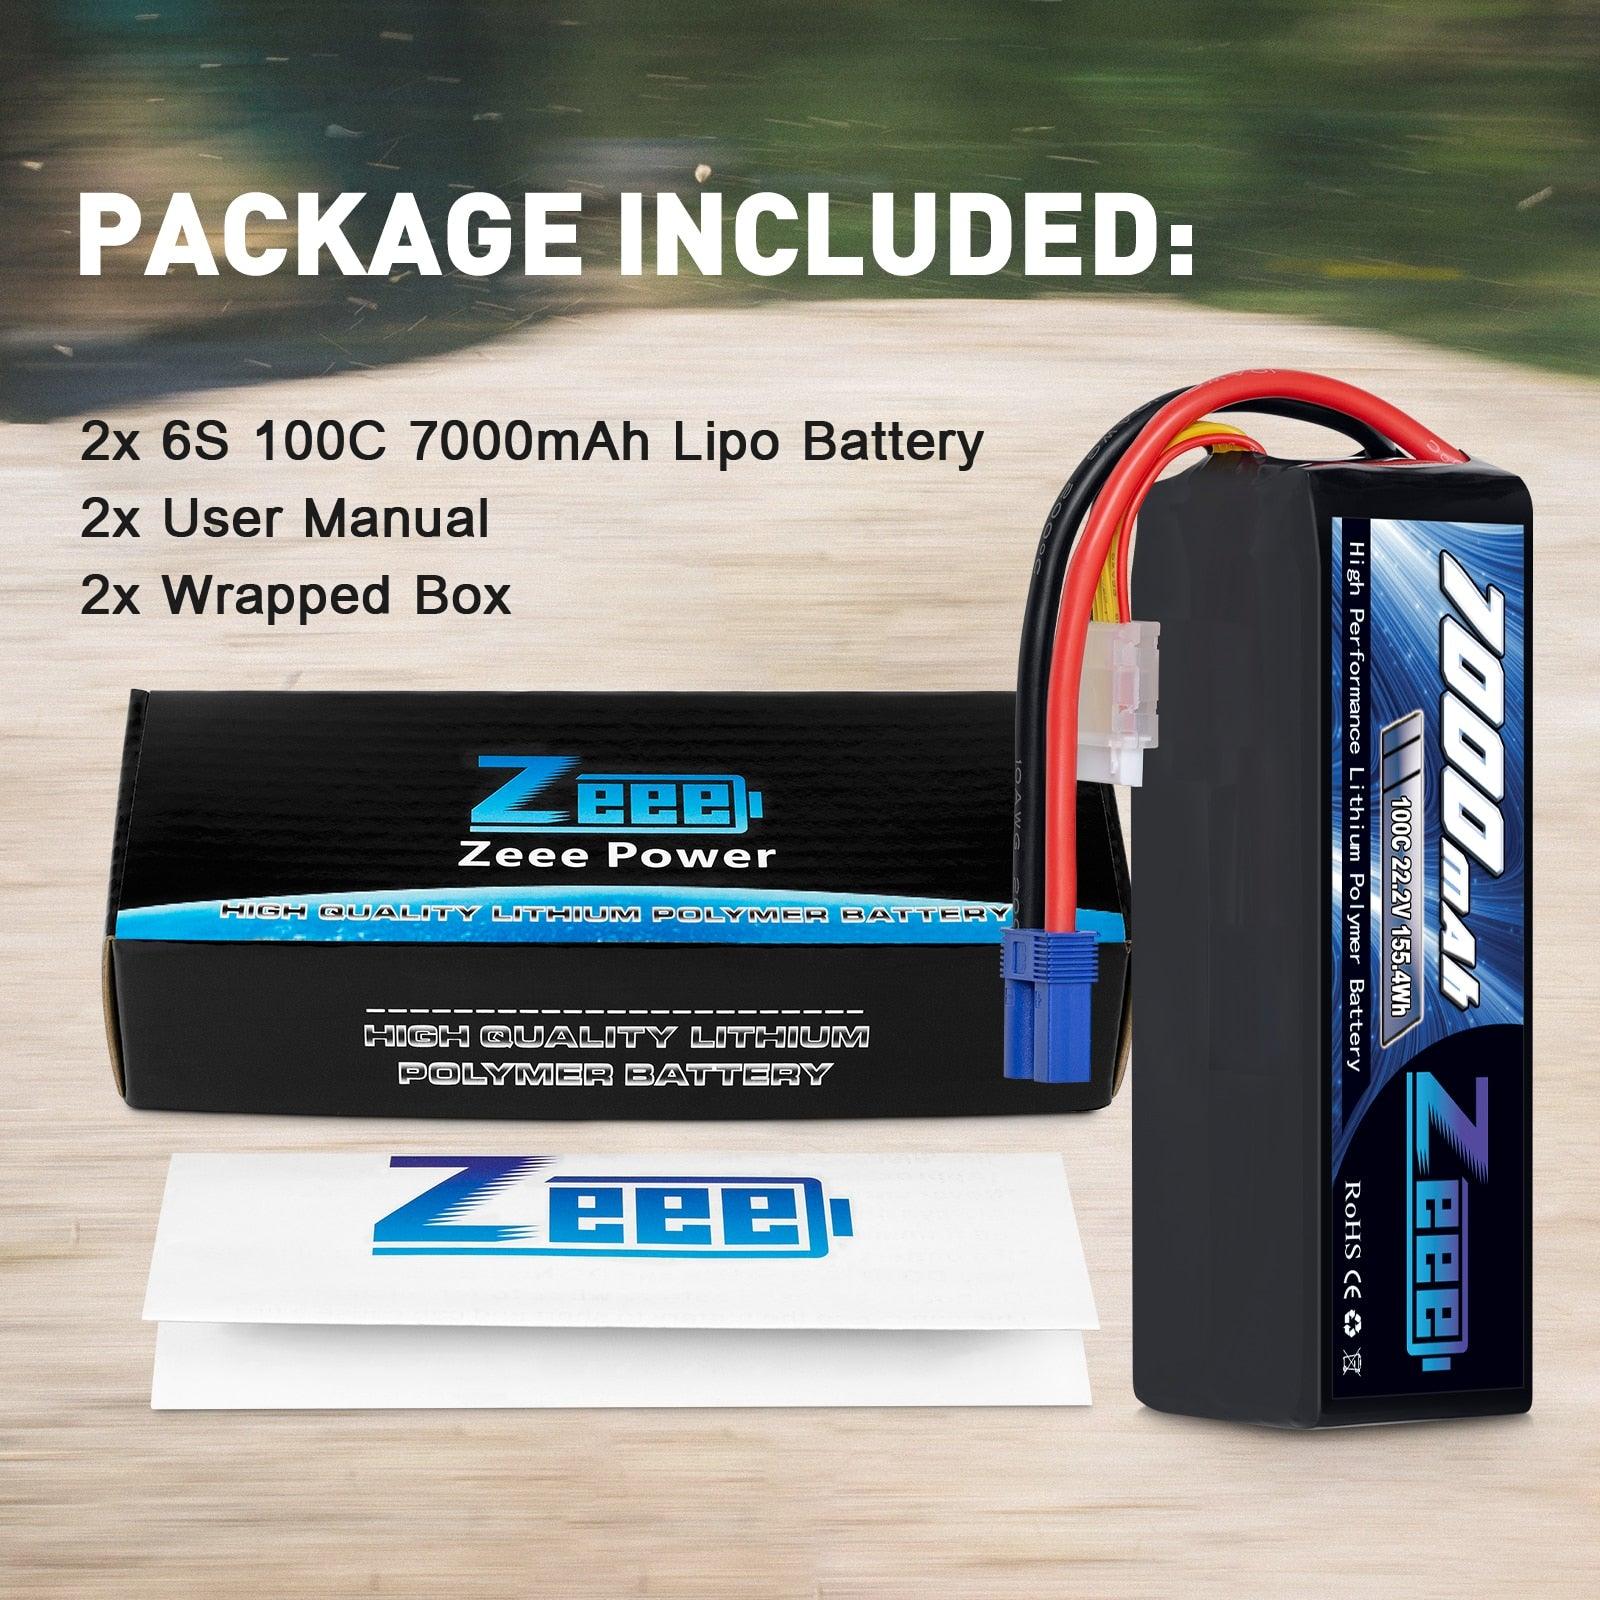 2Units Zeee Lipo Battery 4S 7000mAh 6S 14.8V 22.2V 100C Softcase with EC5 Plug for RC Car Truck Tank Racer Hobby RC Battery - RCDrone